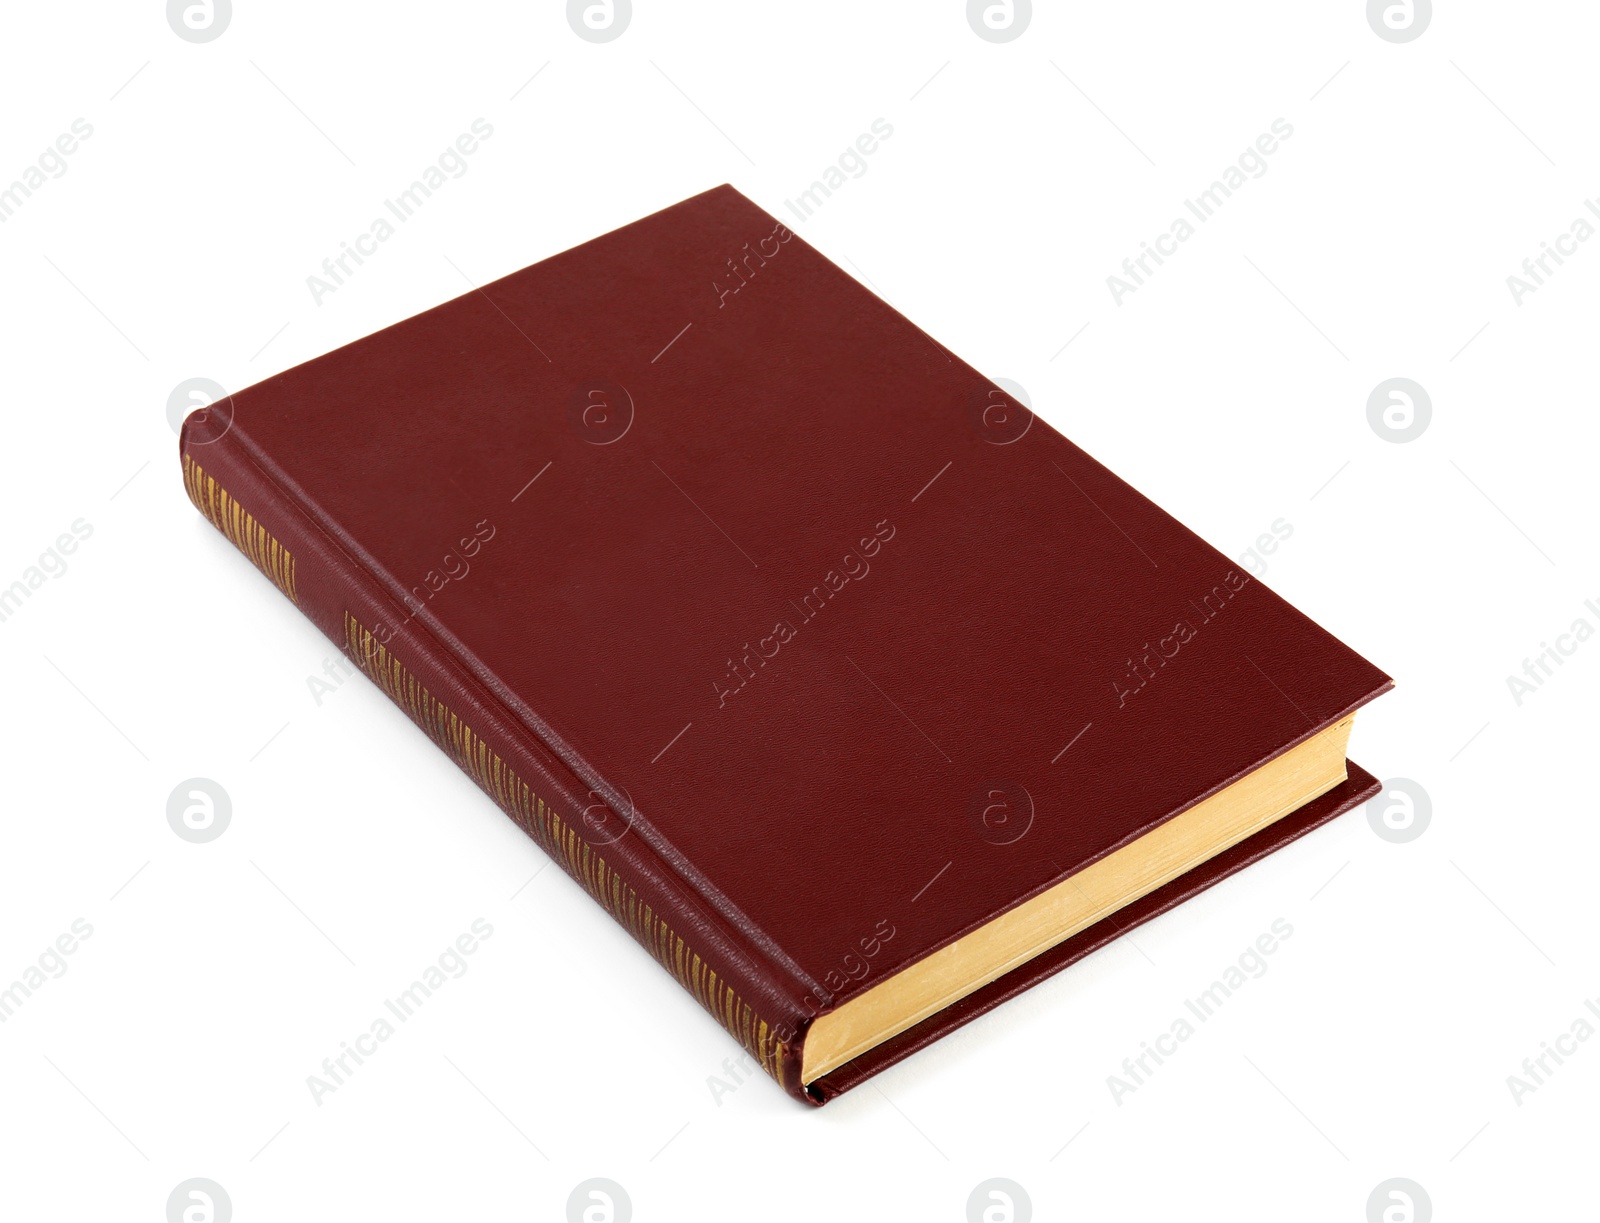 Photo of Closed color hardcover book isolated on white